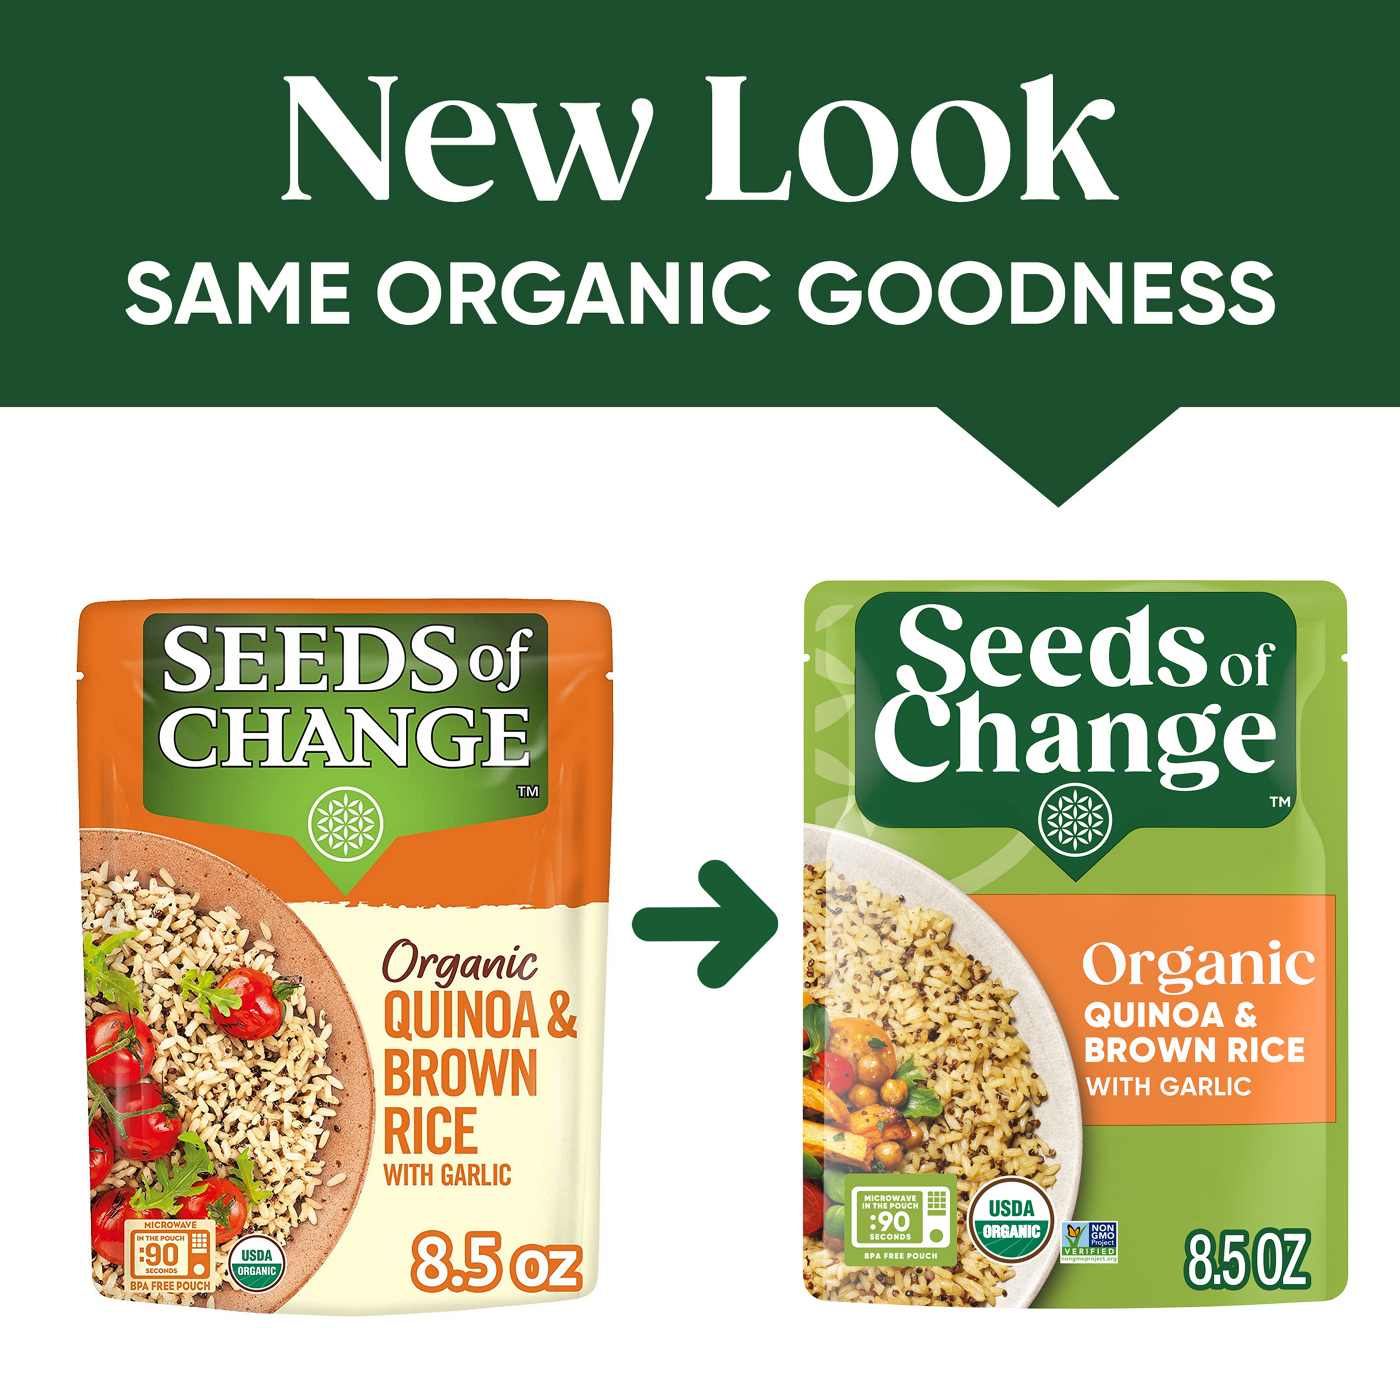 Seeds of Change Organic Quinoa & Brown Rice with Garlic; image 4 of 9